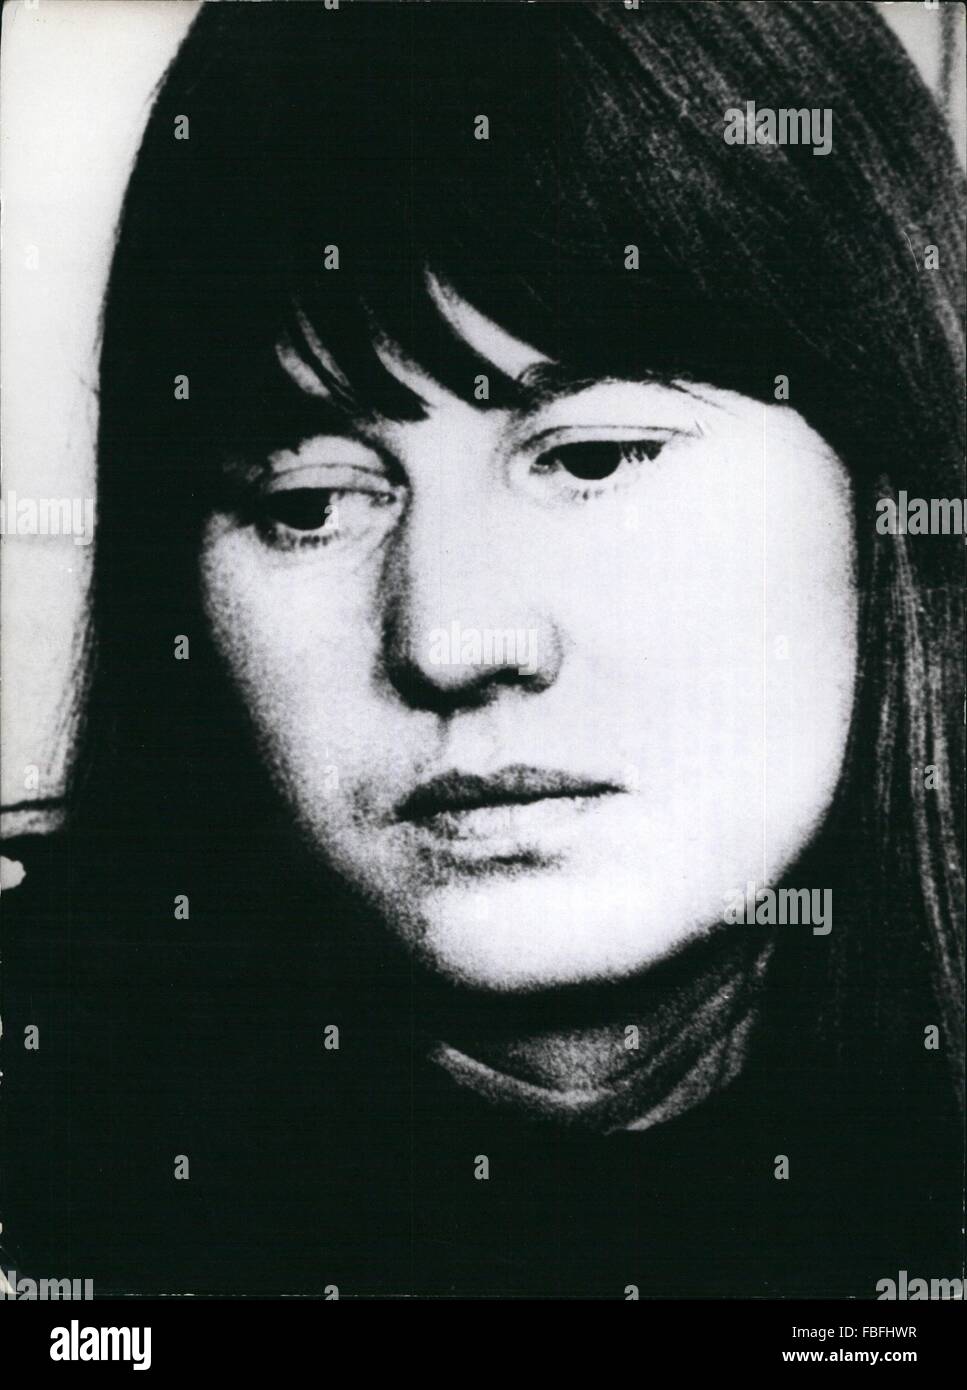 1974 - Ulrike Meinhof committed suicide in Prison: Almost one year after the beginning of the trial against leading members of the anarchist ''Beader/Meinhof group'', another member of the group has died in custody. Ulrike Meinhof (41-picture) was found dead on May 9th in her cell of the Stuttgart Stammheim prison, after she had hanged herself with a towel. On November 9th 1974, Holger Meins, also one of the leaders of the group, had died while being on hunger strike. Ulrike Meinhof was born on October 7th 1934 in Oldenburg (North Germany). She studied philosophy, pedagogics, socilogy and Germ Stock Photo